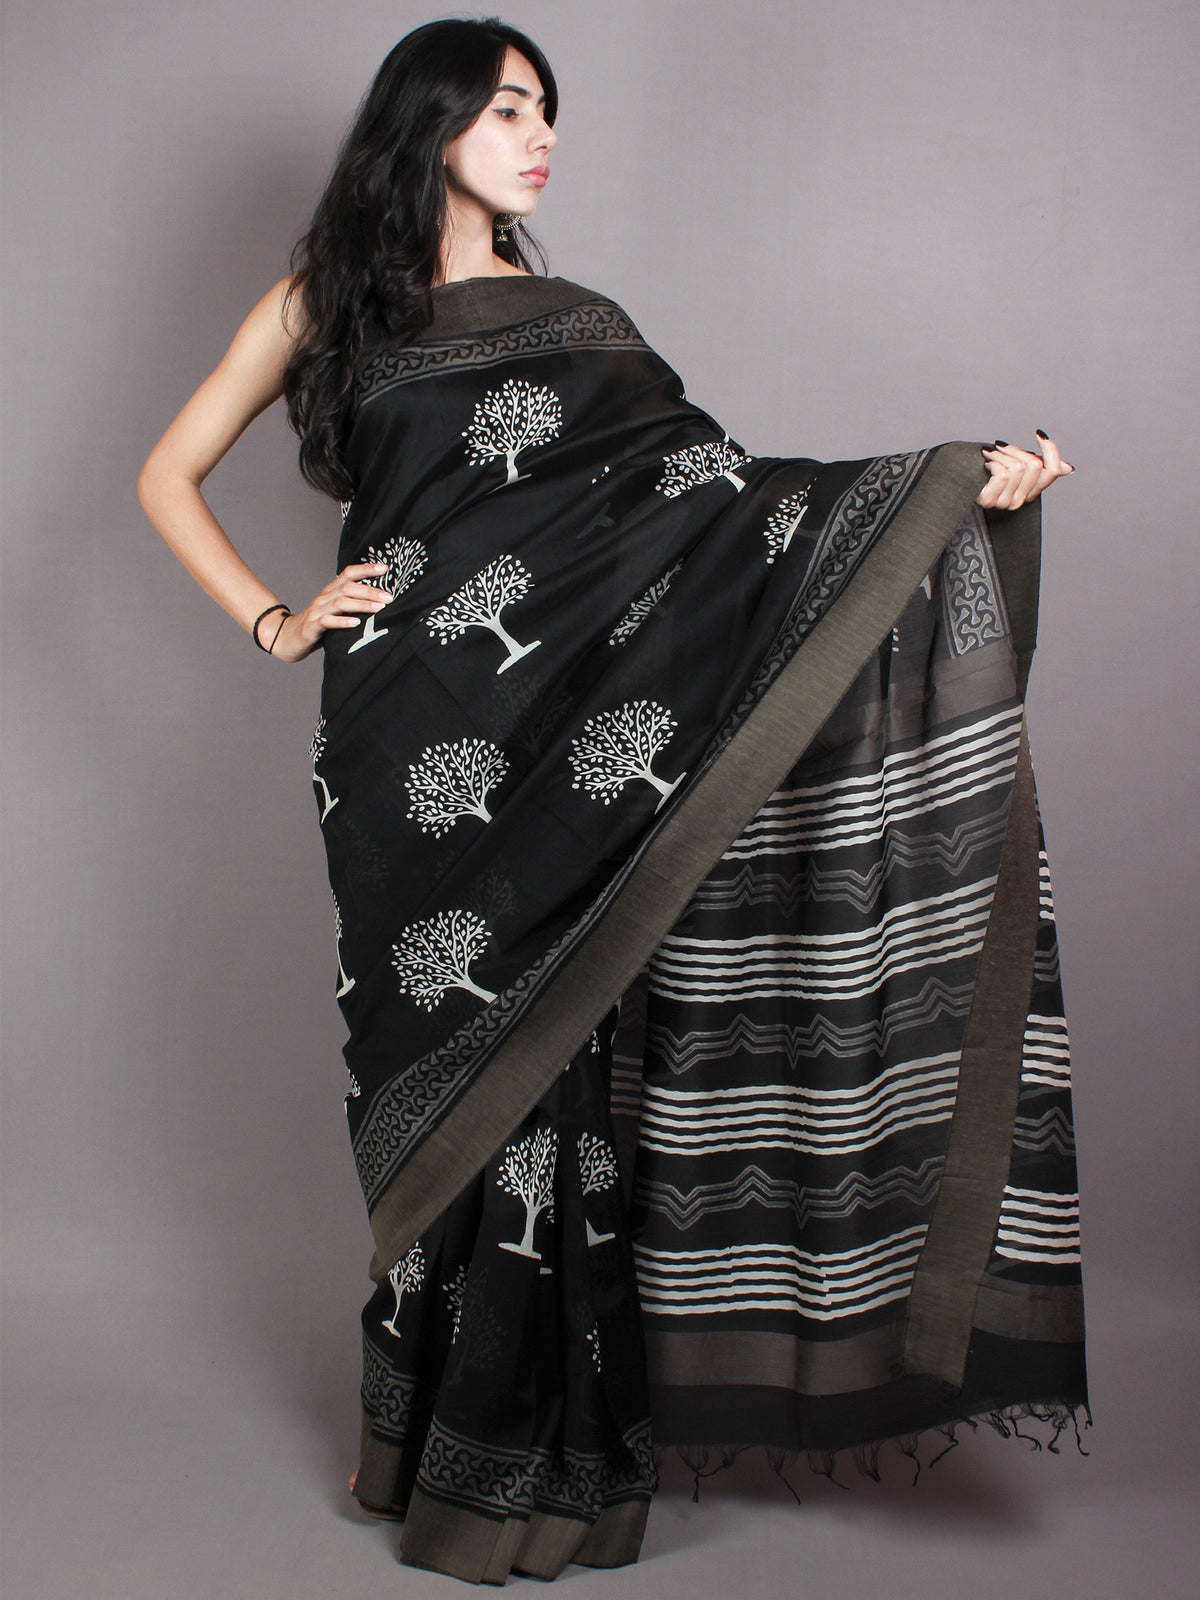 Black White Hand Block Printed in Natural Vegetable Colors Chanderi Saree With Geecha Border - S03170374